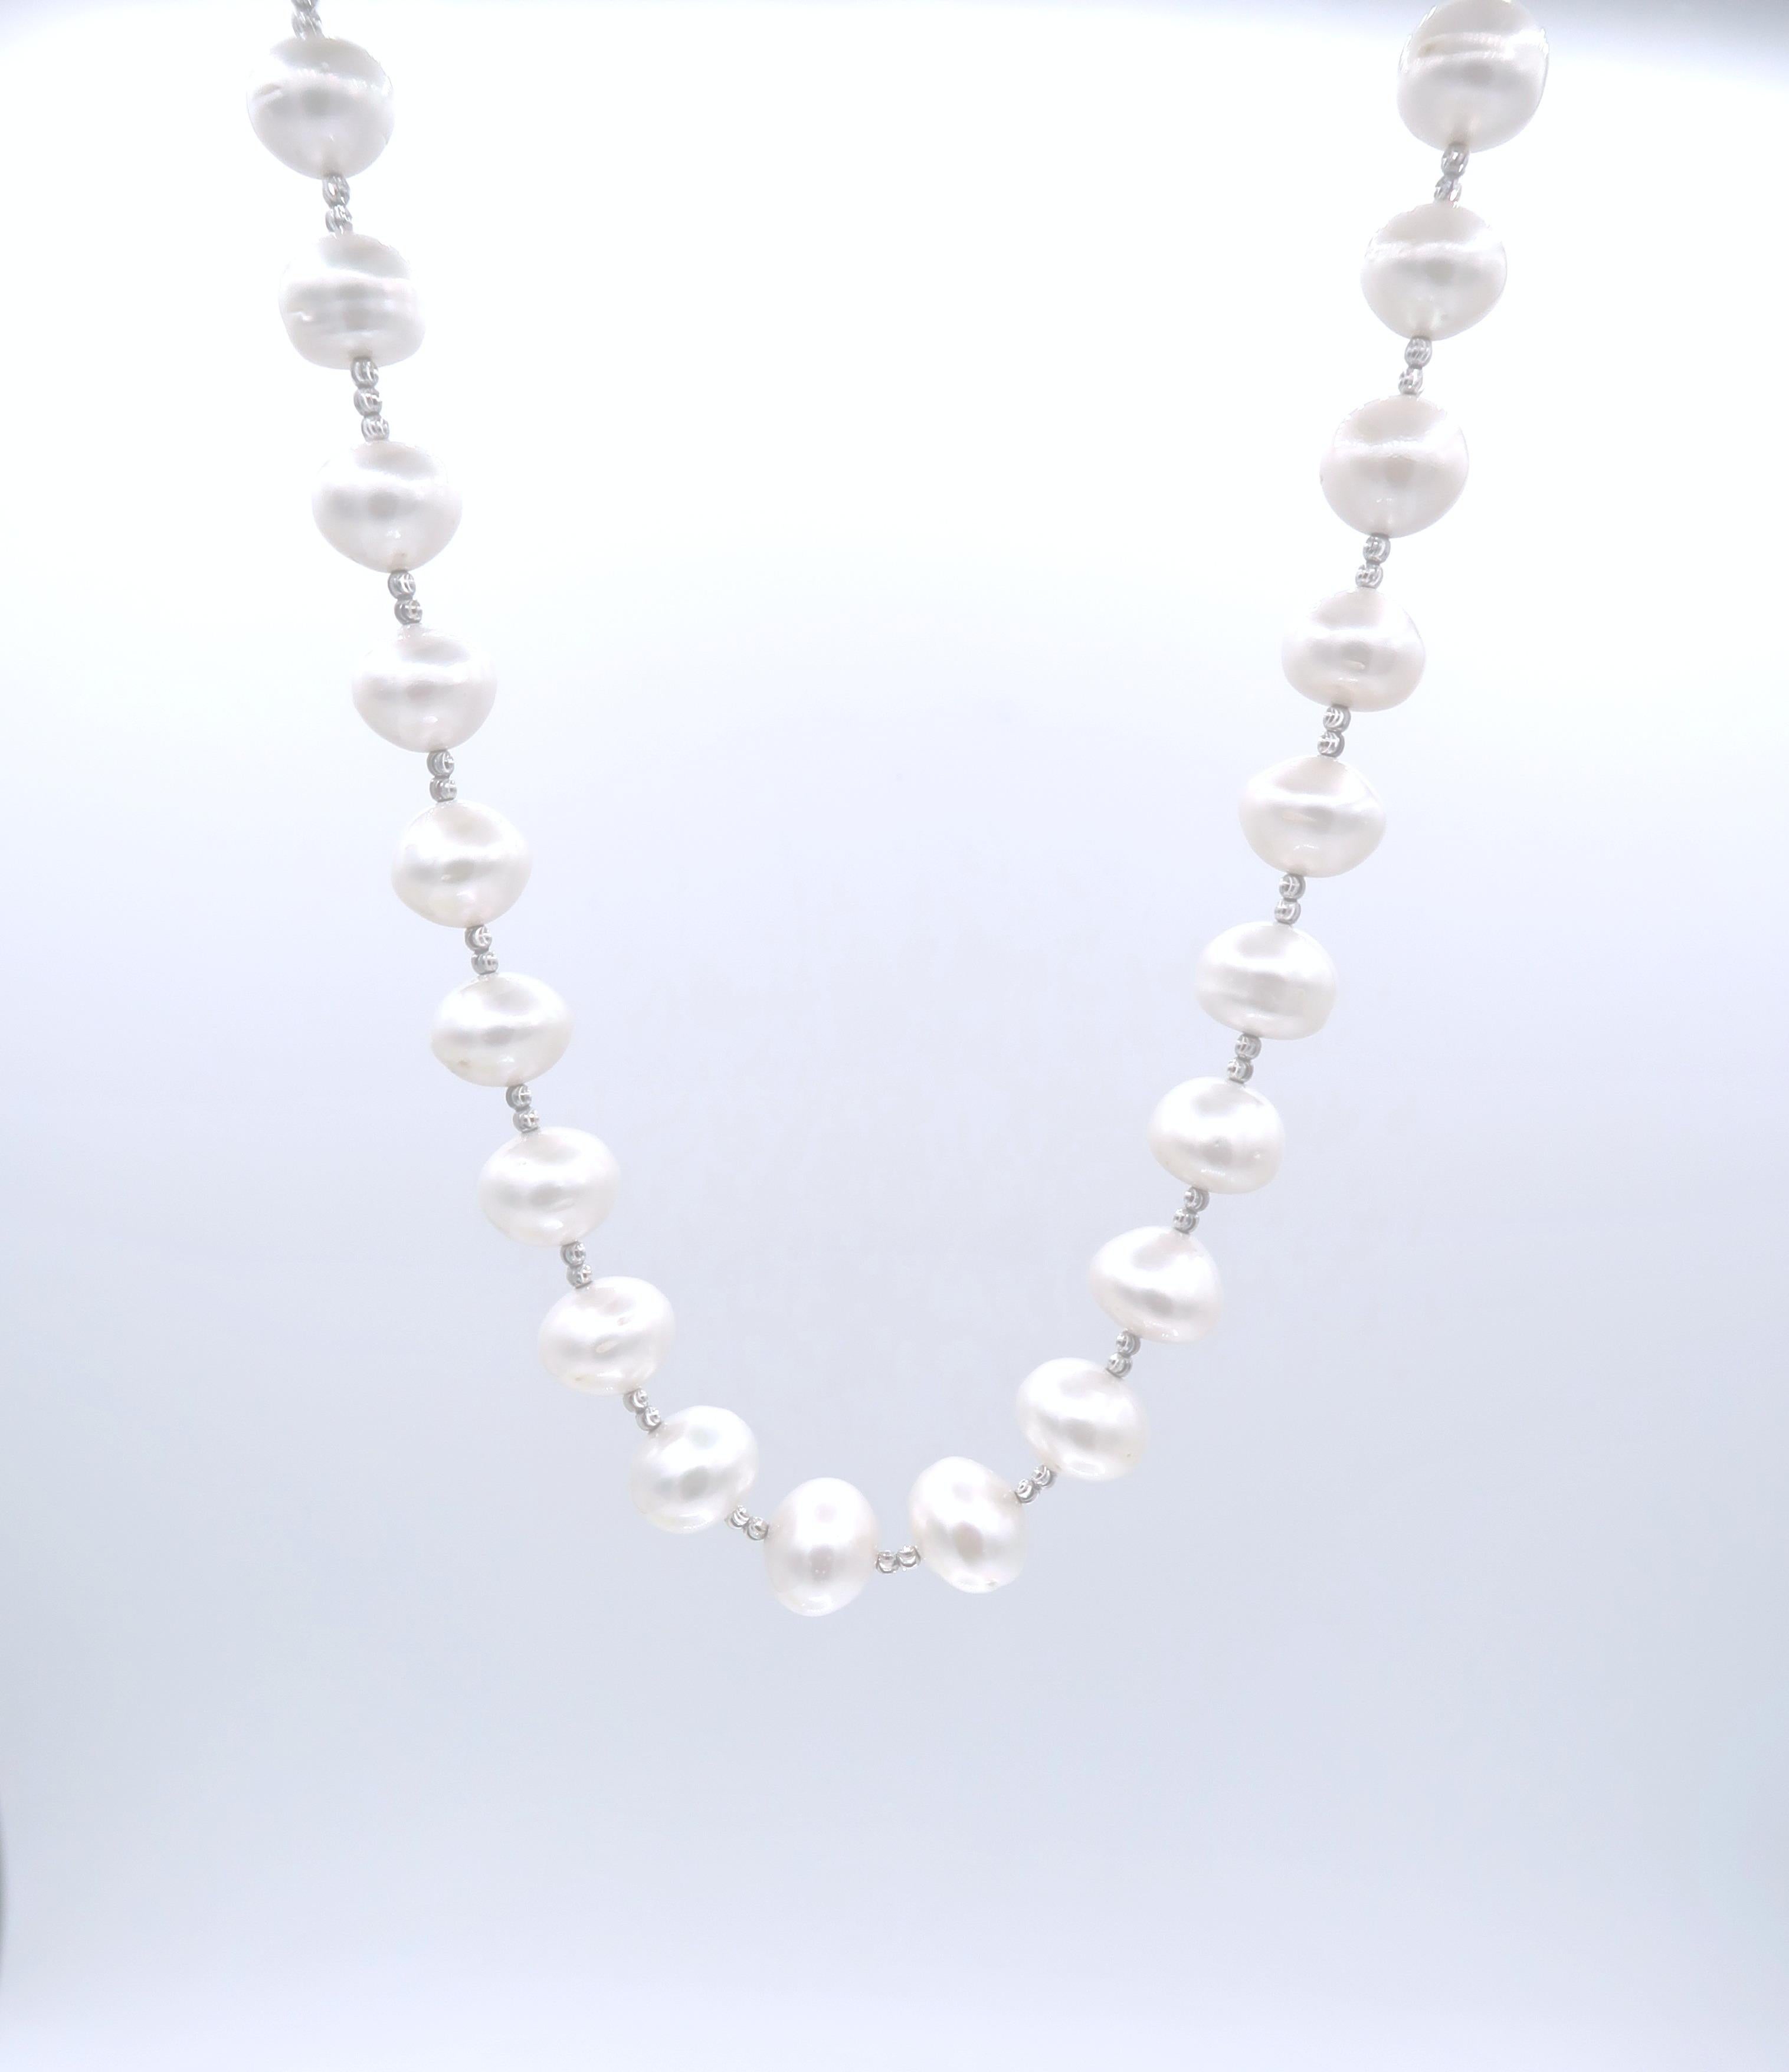 BOON 22 inch White South Sea Pearl Strand Necklace with 18K White Gold Beads

Length : 22